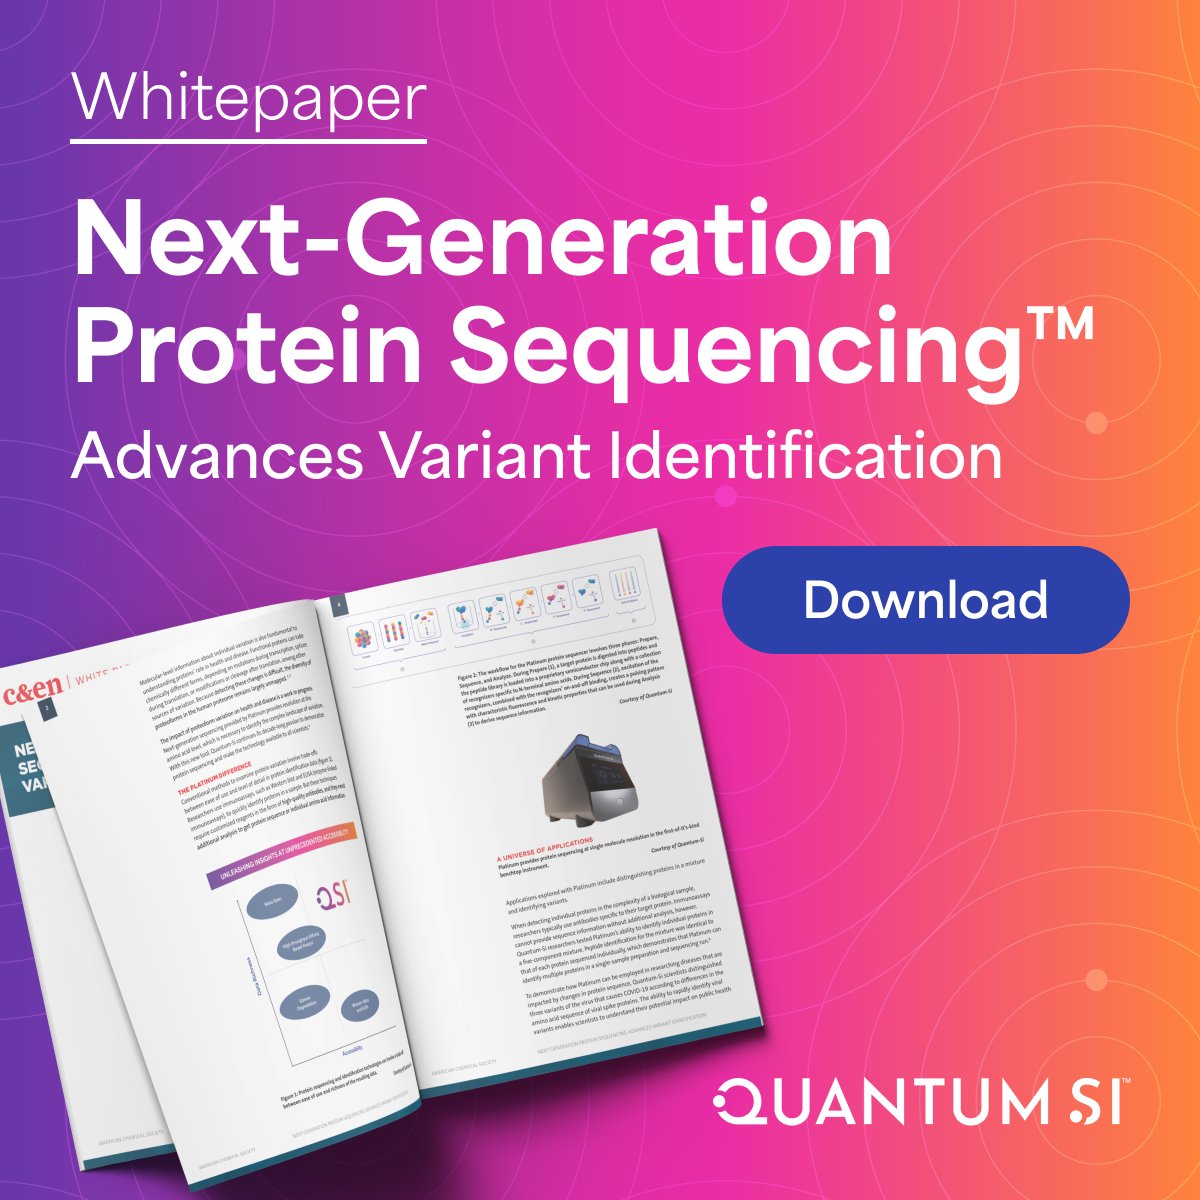 Over 1M #proteoforms make up the human proteome, but what has been sequenced barely scratches the surface. Learn how Next-Generation Protein Sequencing™ tech has unlocked massive accessibility & scale, and how this could change #proteomics as we know it. bit.ly/3vZKJbJ